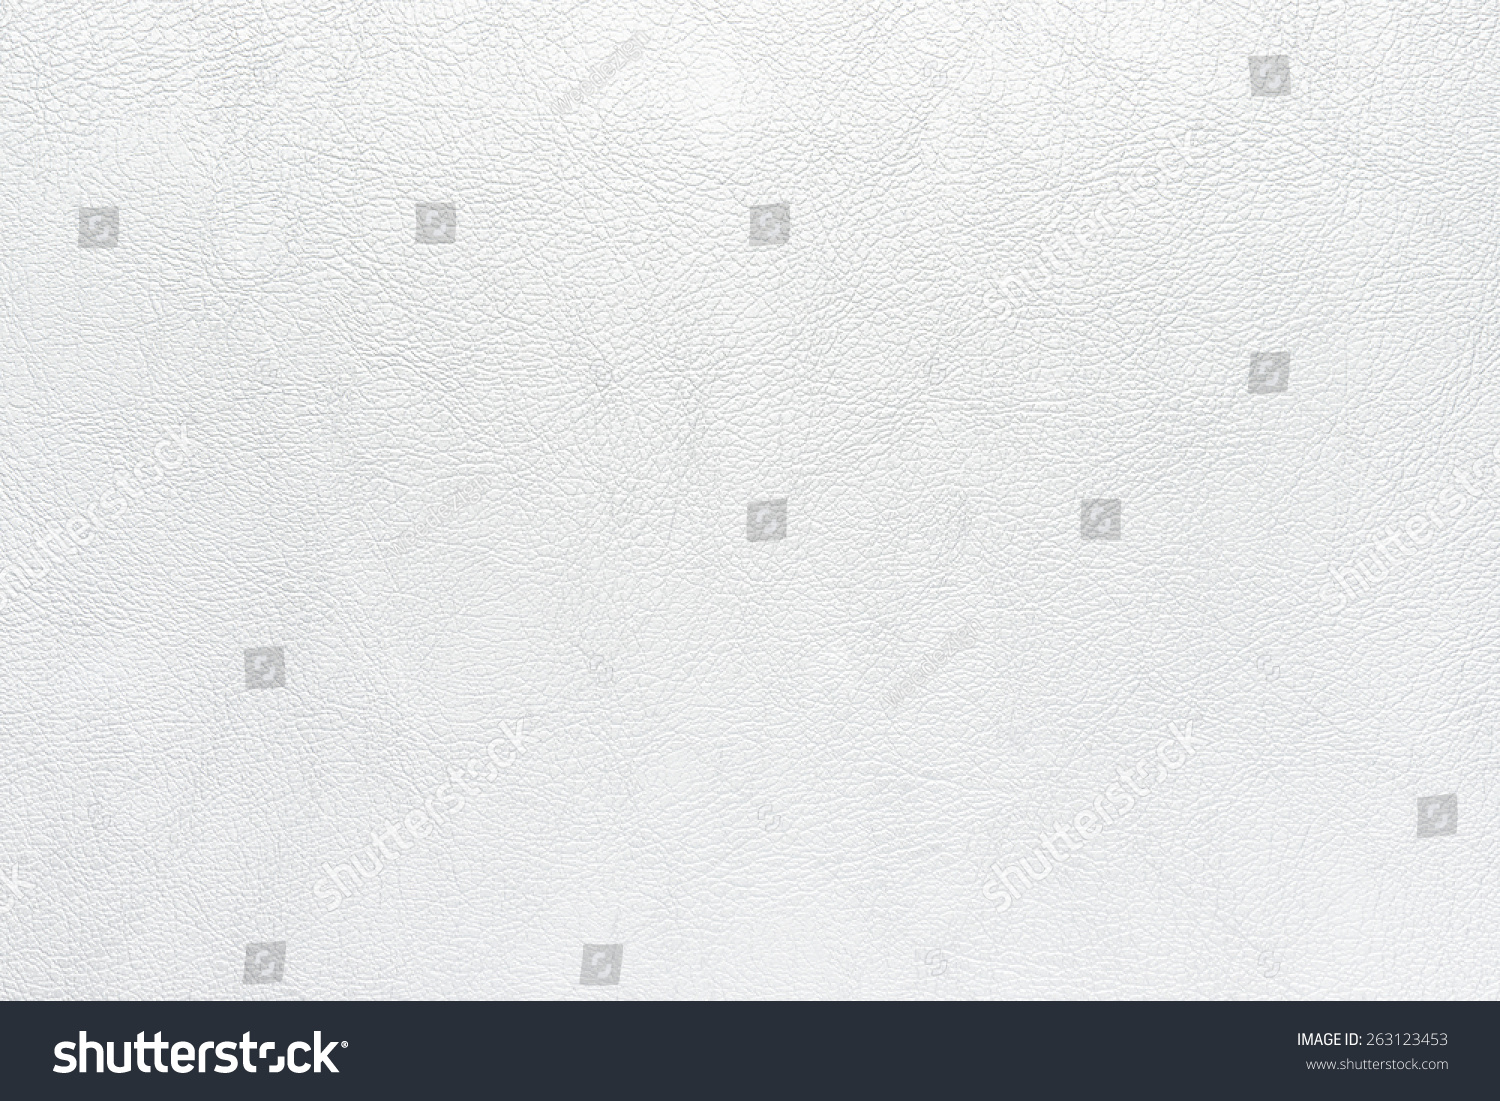 white leather texture background #263123453